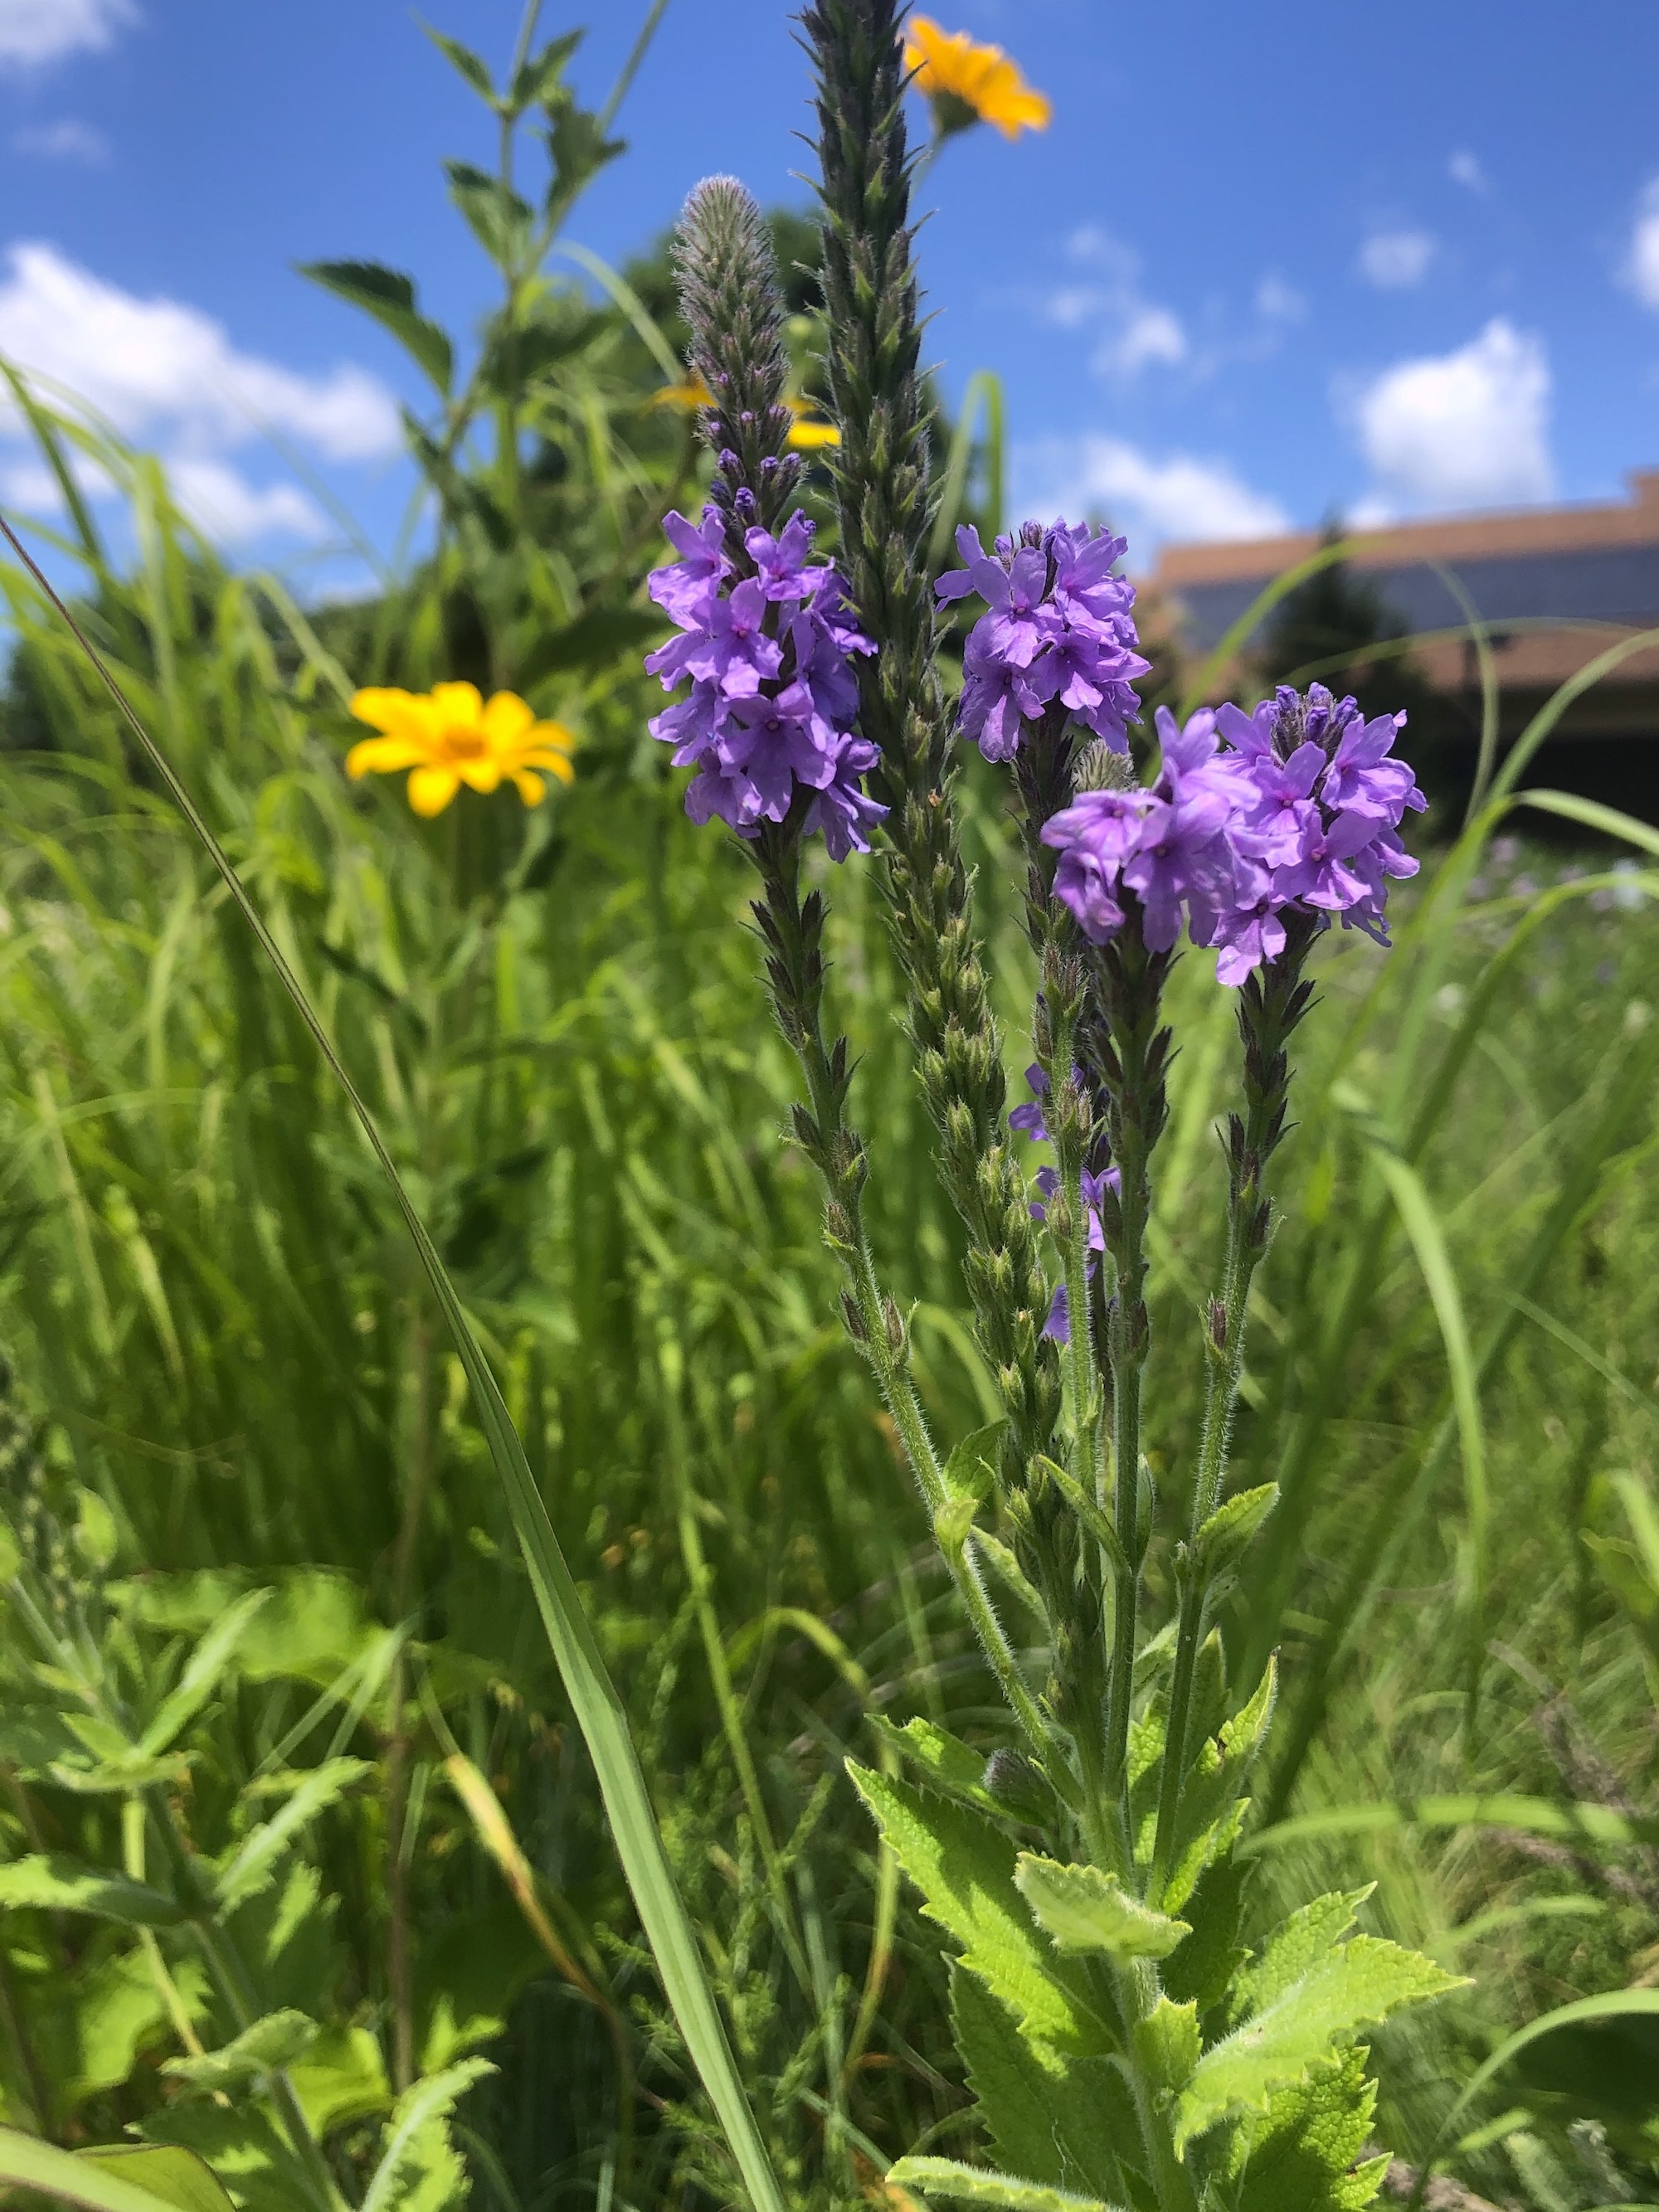 Hoary Vervain next to the UW Arboretum Visitors Center parking lot on July 10, 2020.